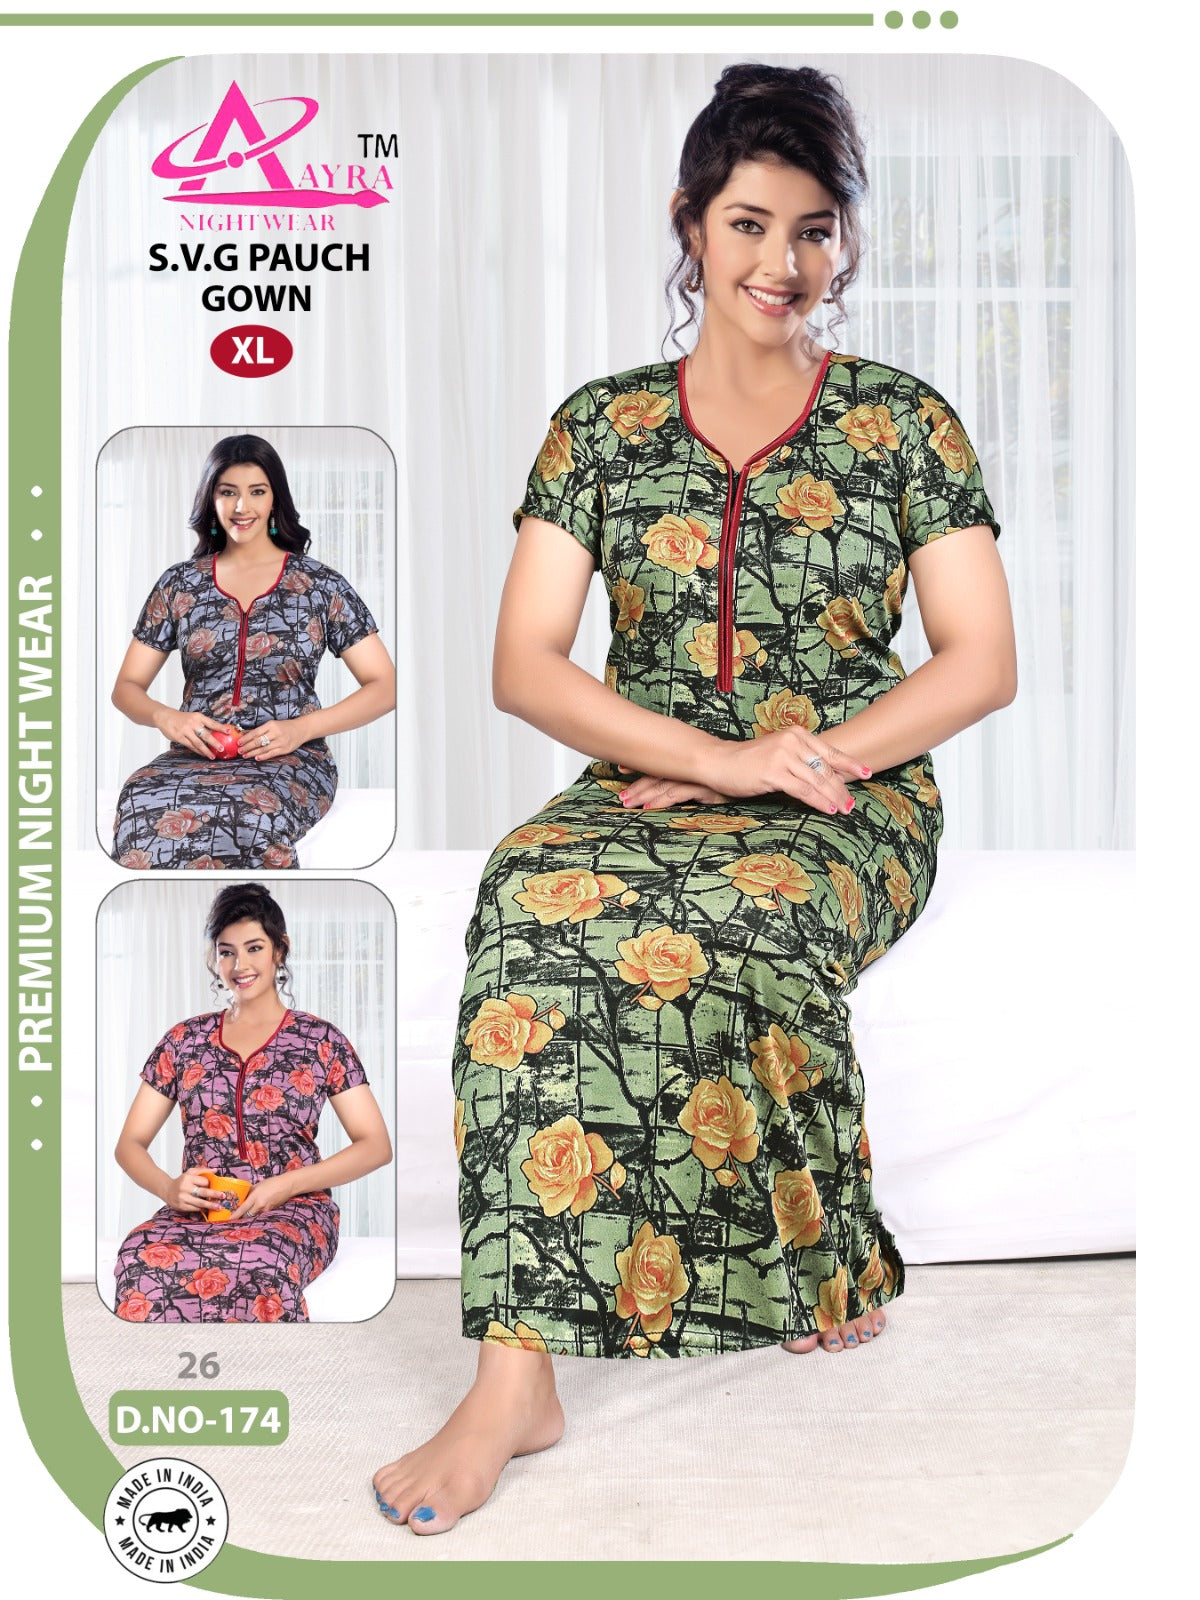 Svg Pauch Aayra Feeding Night Gown